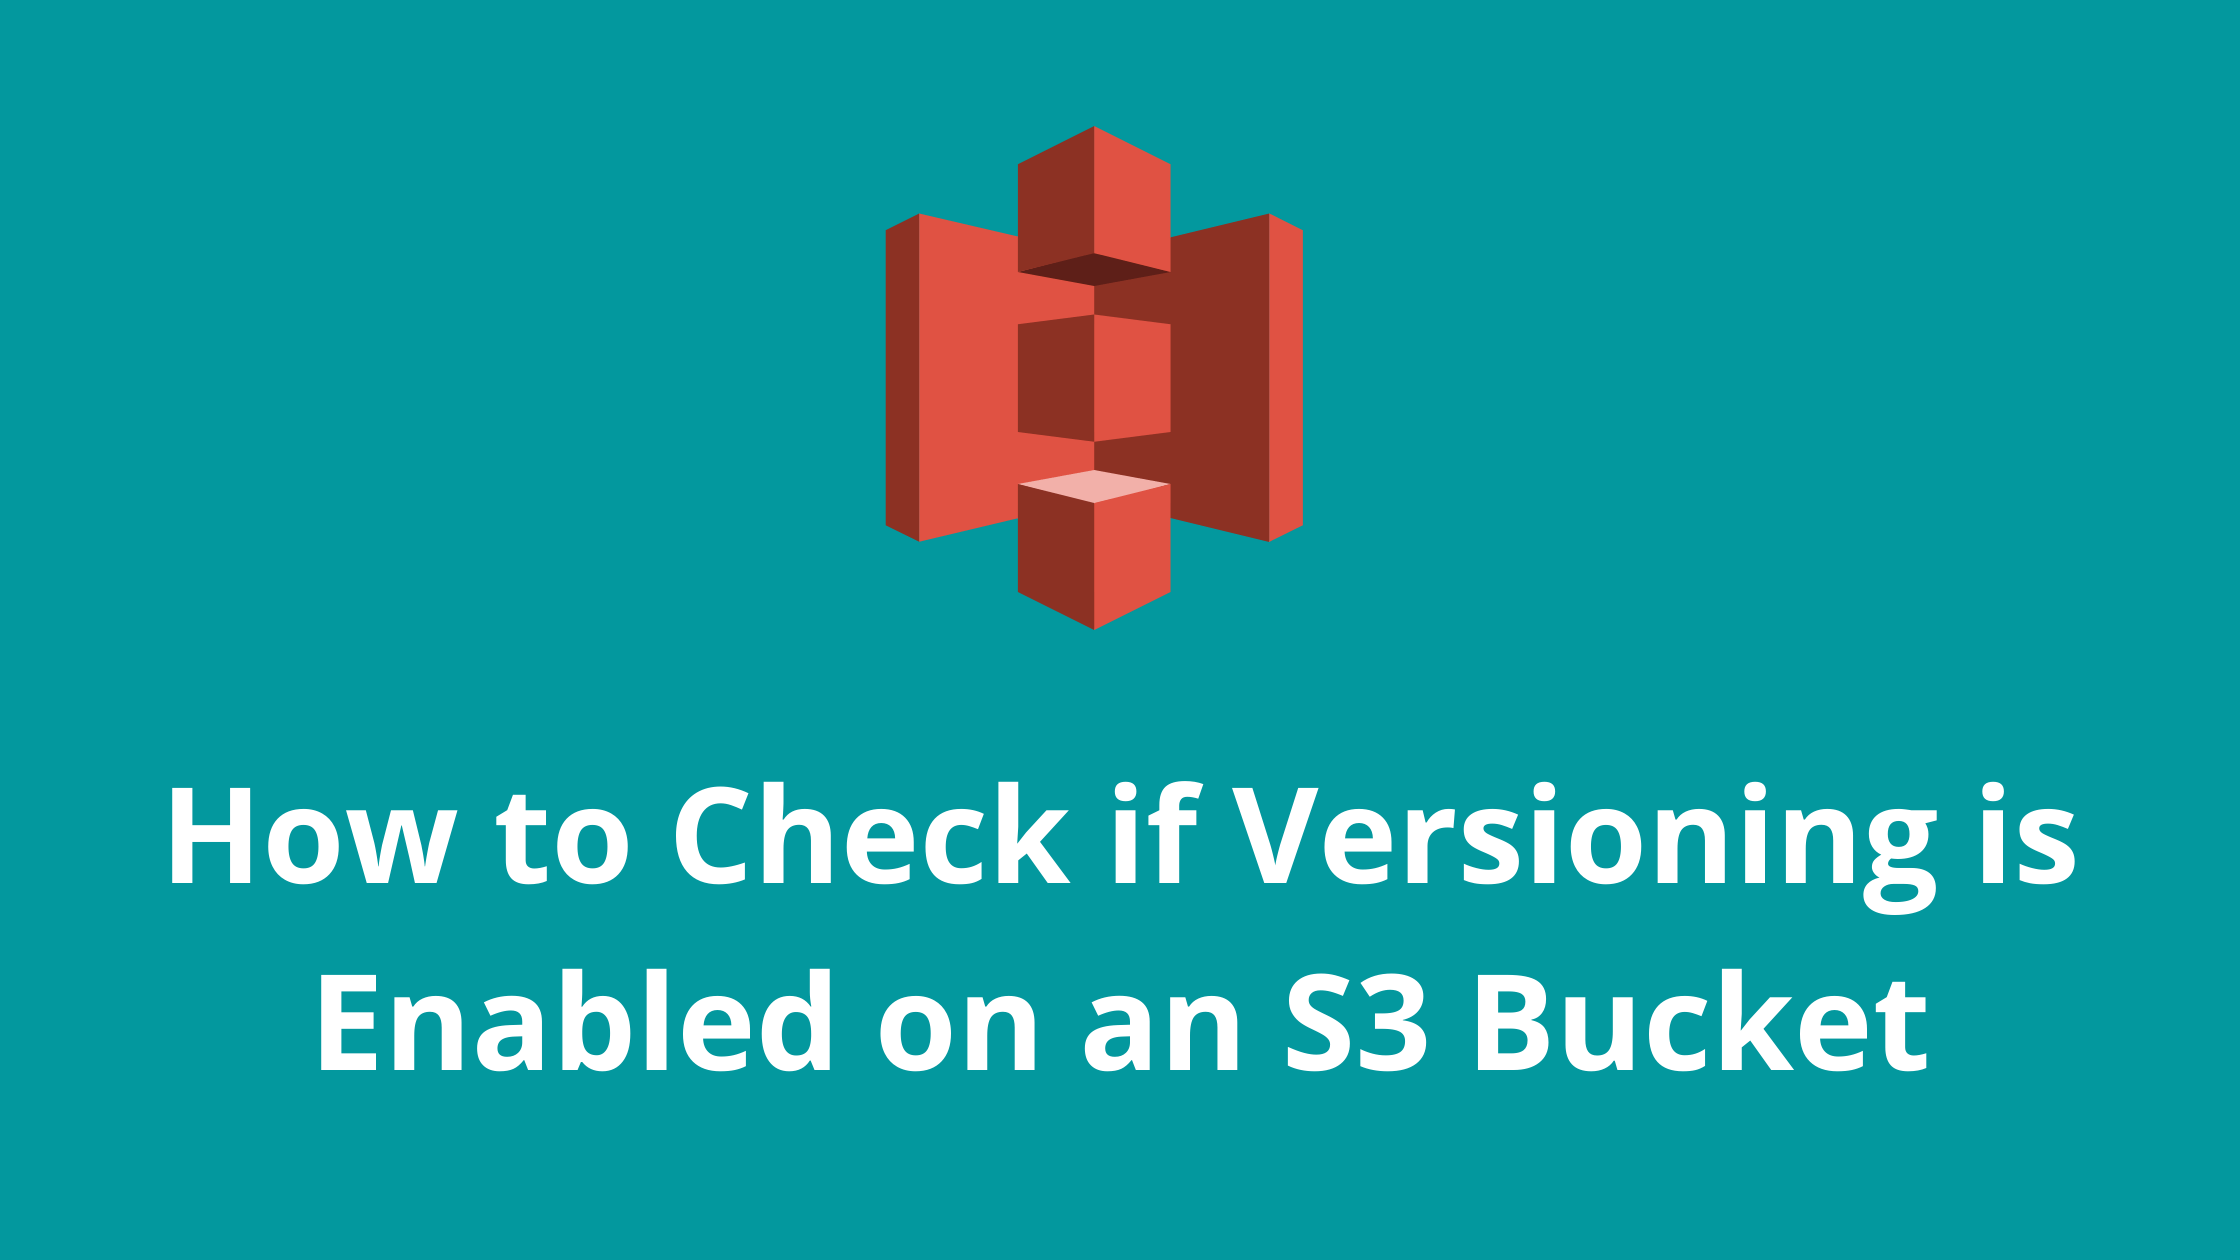 How to Check if Versioning is Enabled on an S3 Bucket